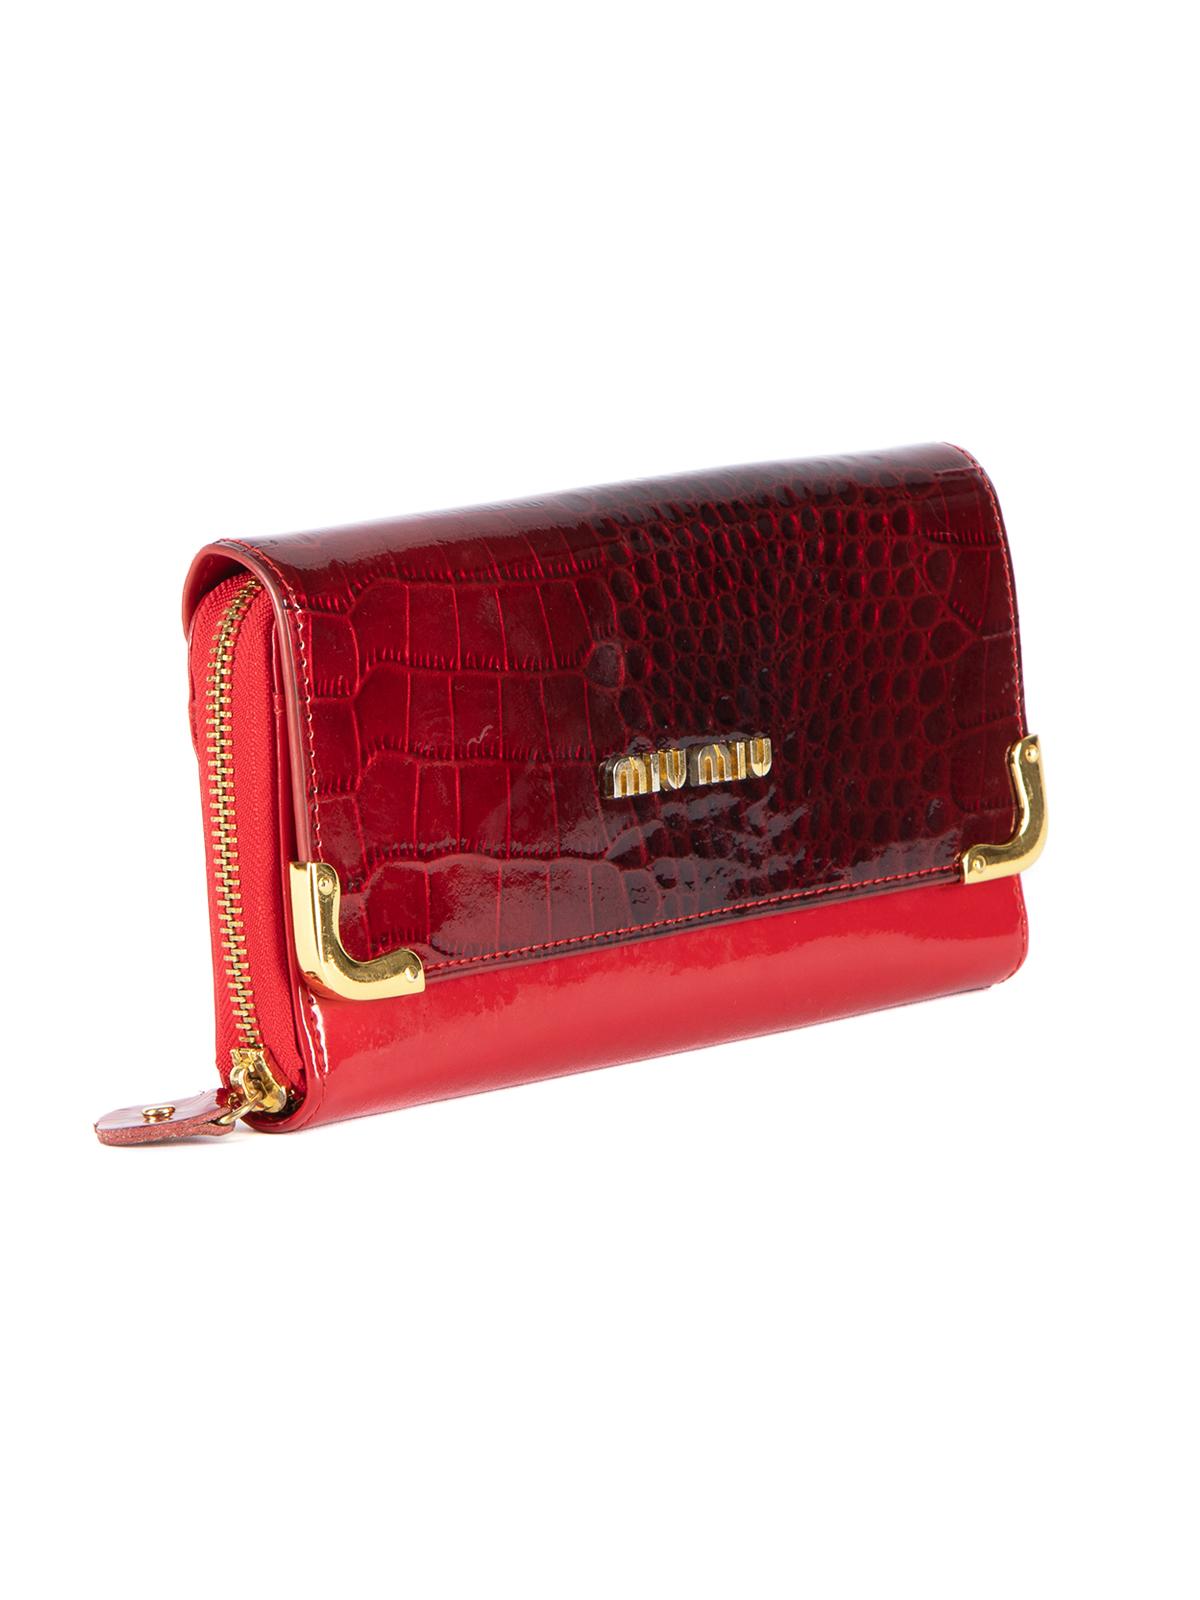 CONDITION is Very good. Minimal wear to wallet is evident. Few indents/scuffs seen to the back of wallet on this used Miu Miu designer resale item. Details Red Patent leather Snakeskin pattern Leather interior Gold tone hardware Multiple